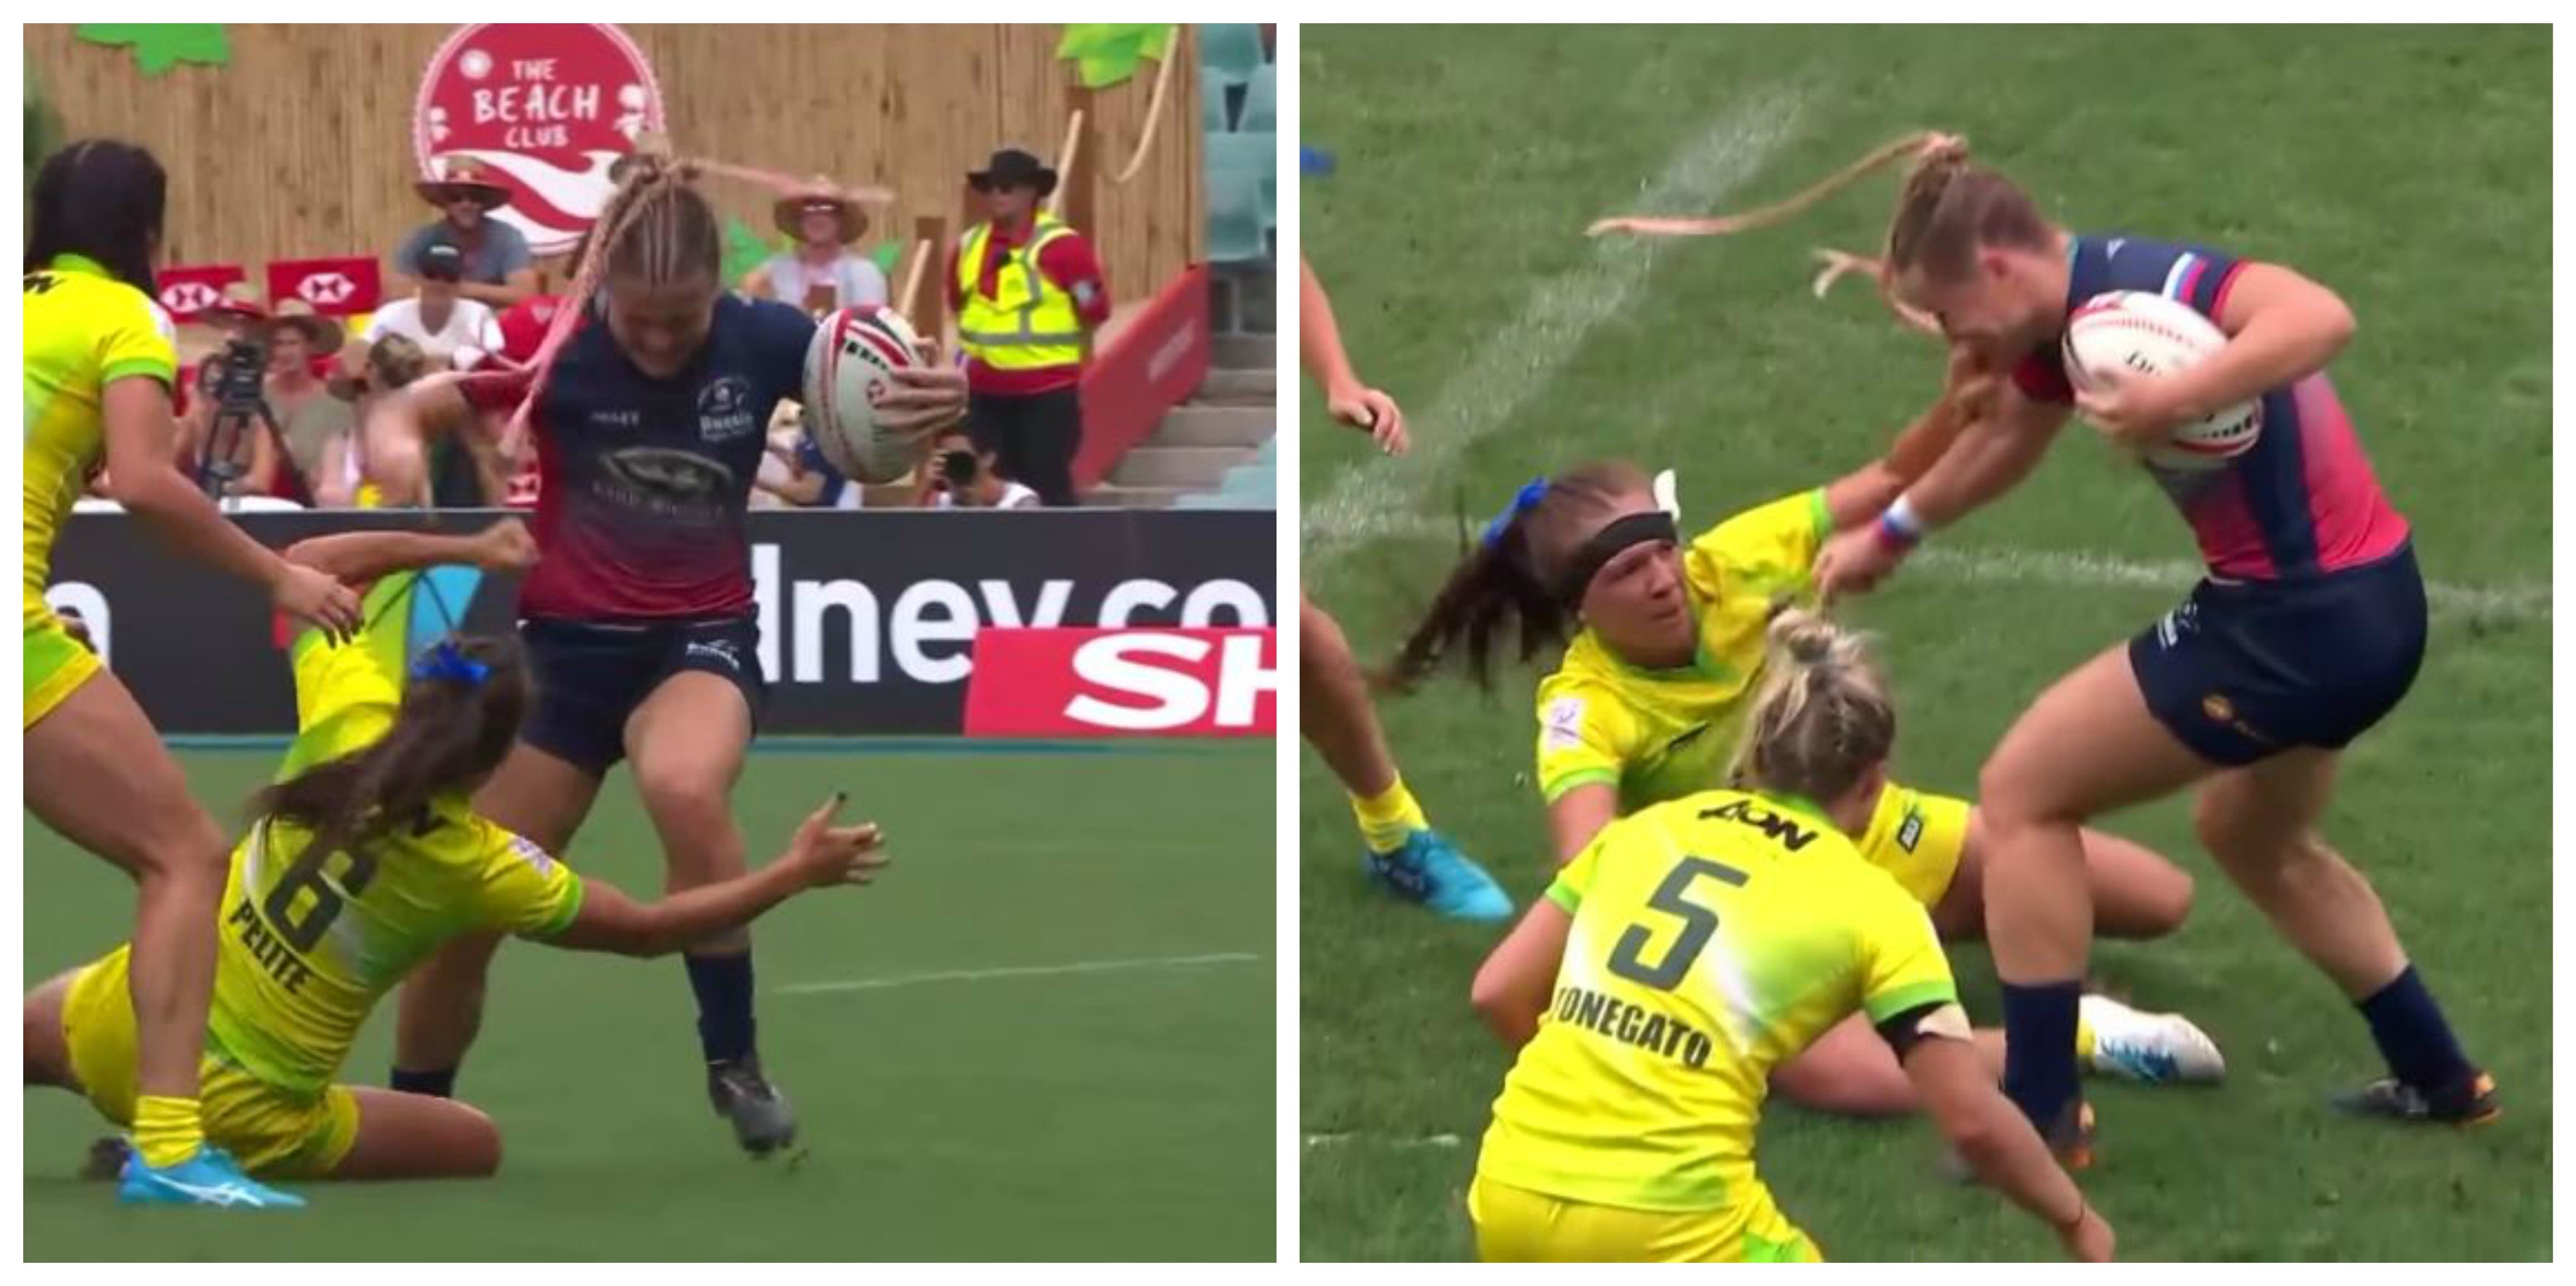 VIDEO: 8 game ban for this Russian 7s player's reckless use of the boot